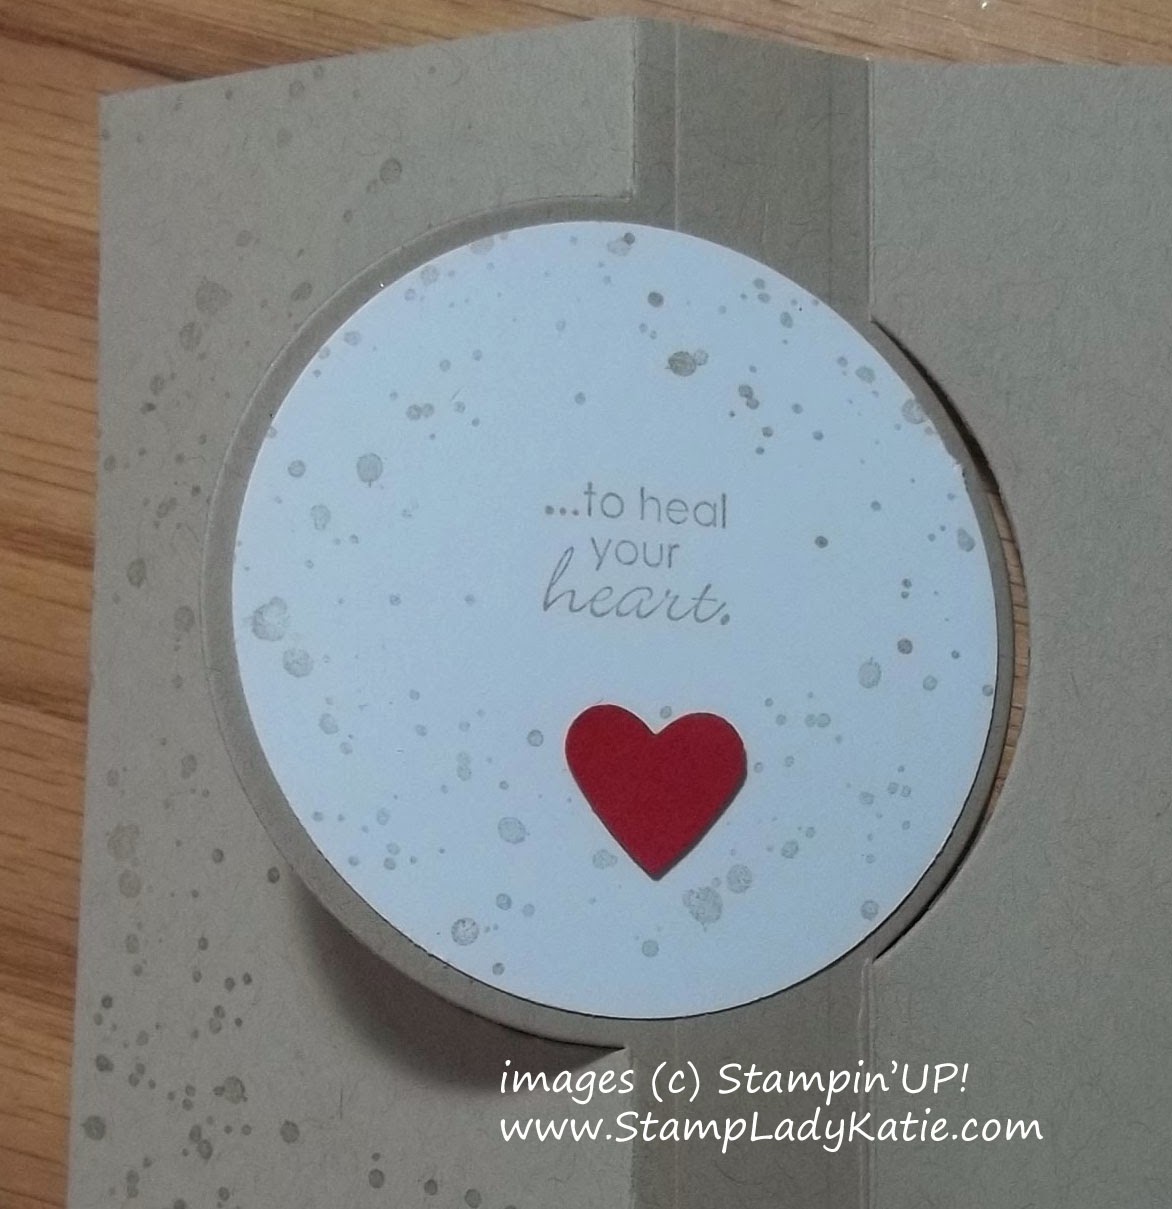 Sympathy card for a lost pet using Stampin'UP!s Circle Thinlit Dies and a punch art paw print.